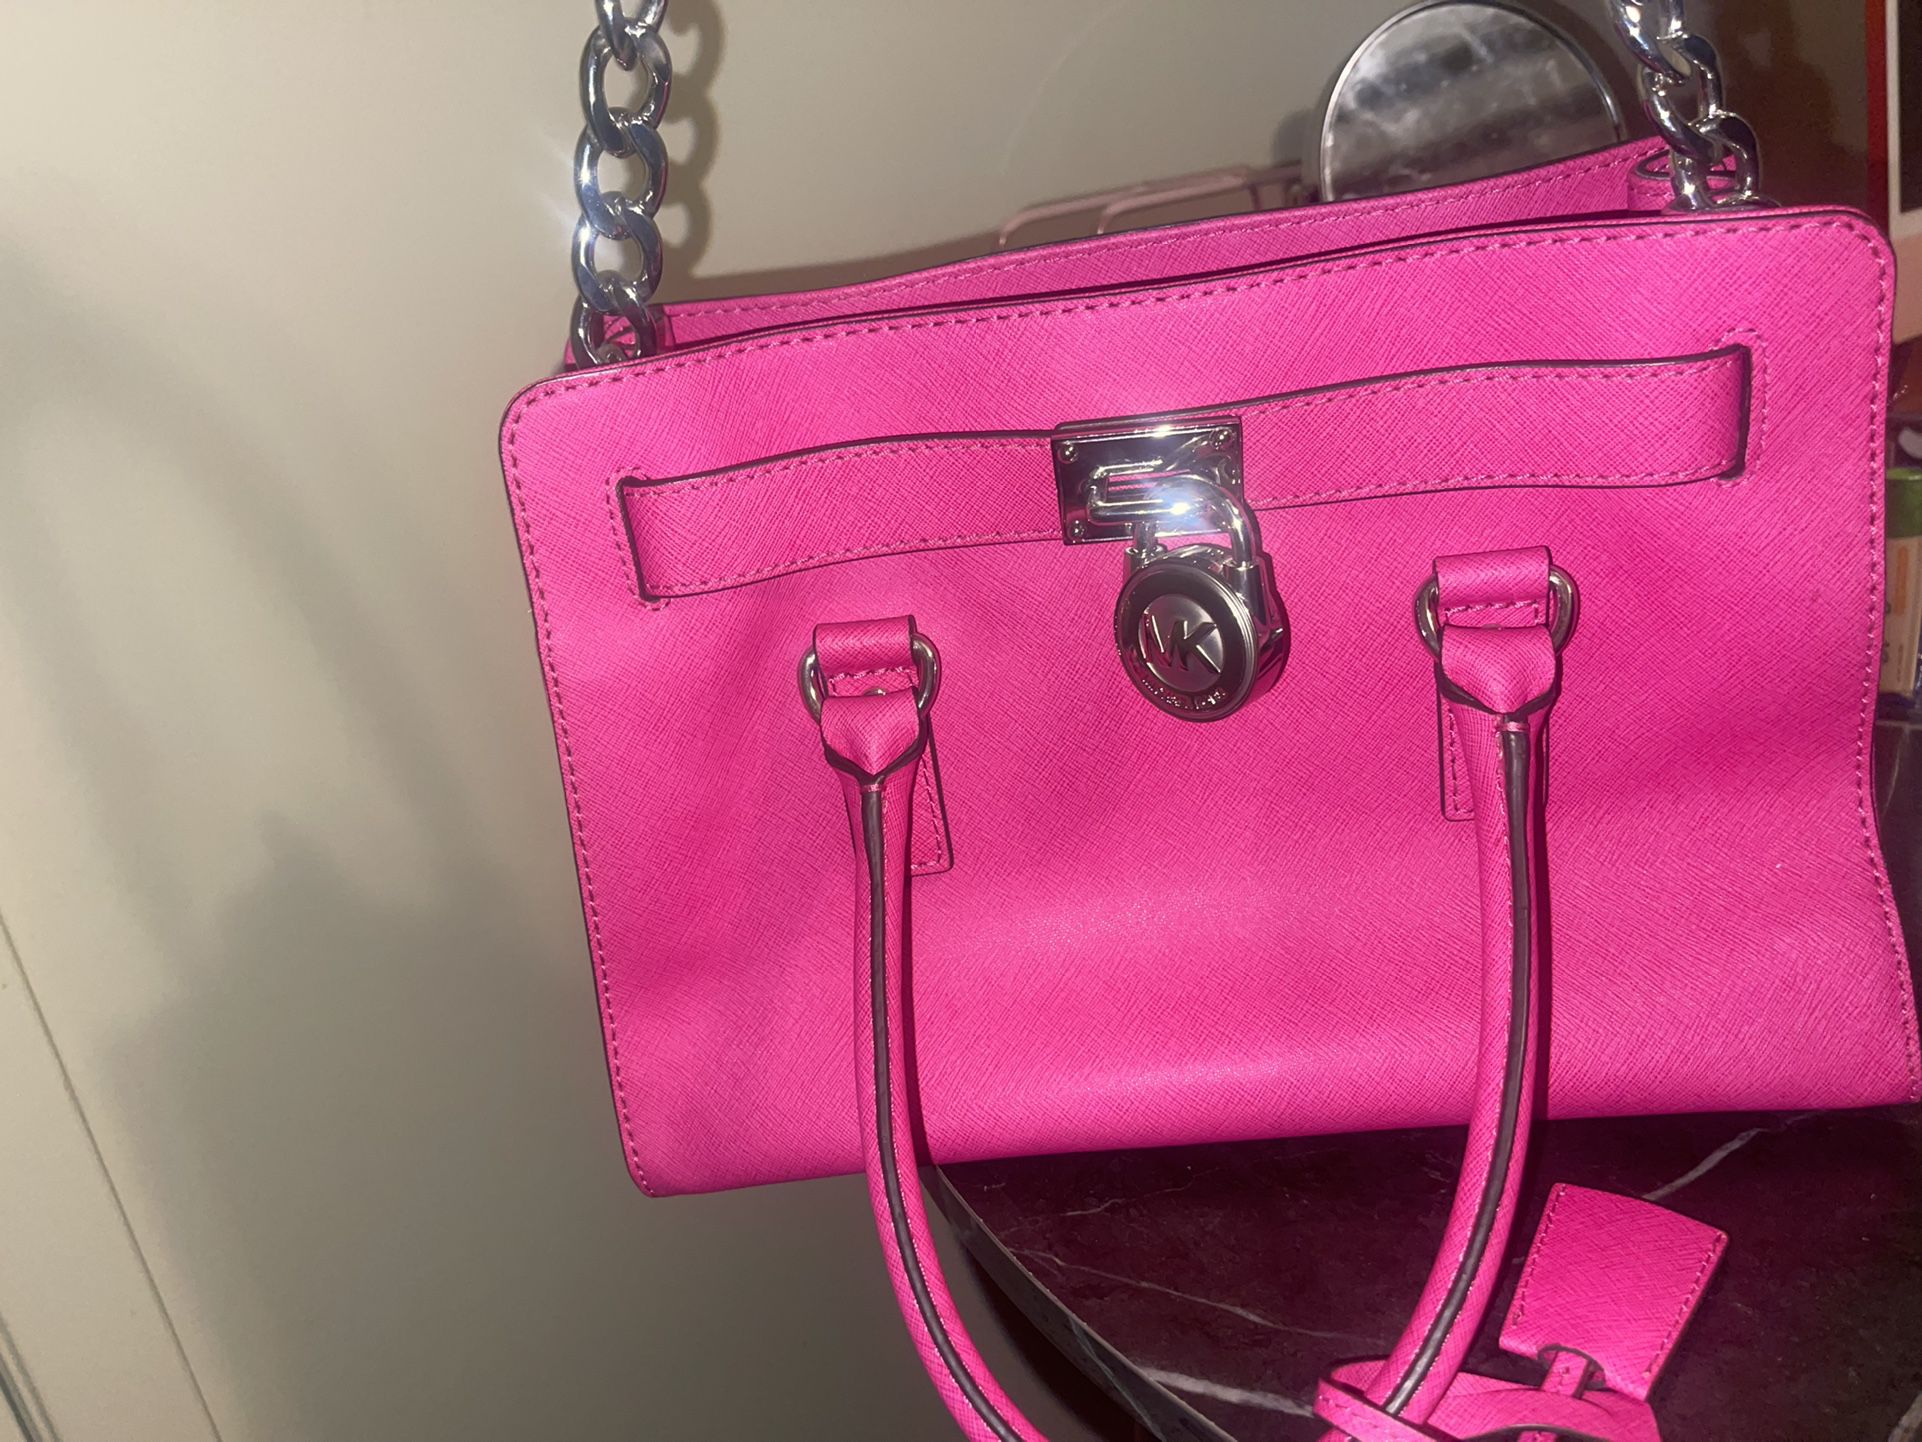 Hot pink Michael Kors bag with gold hardware. Mint condition.